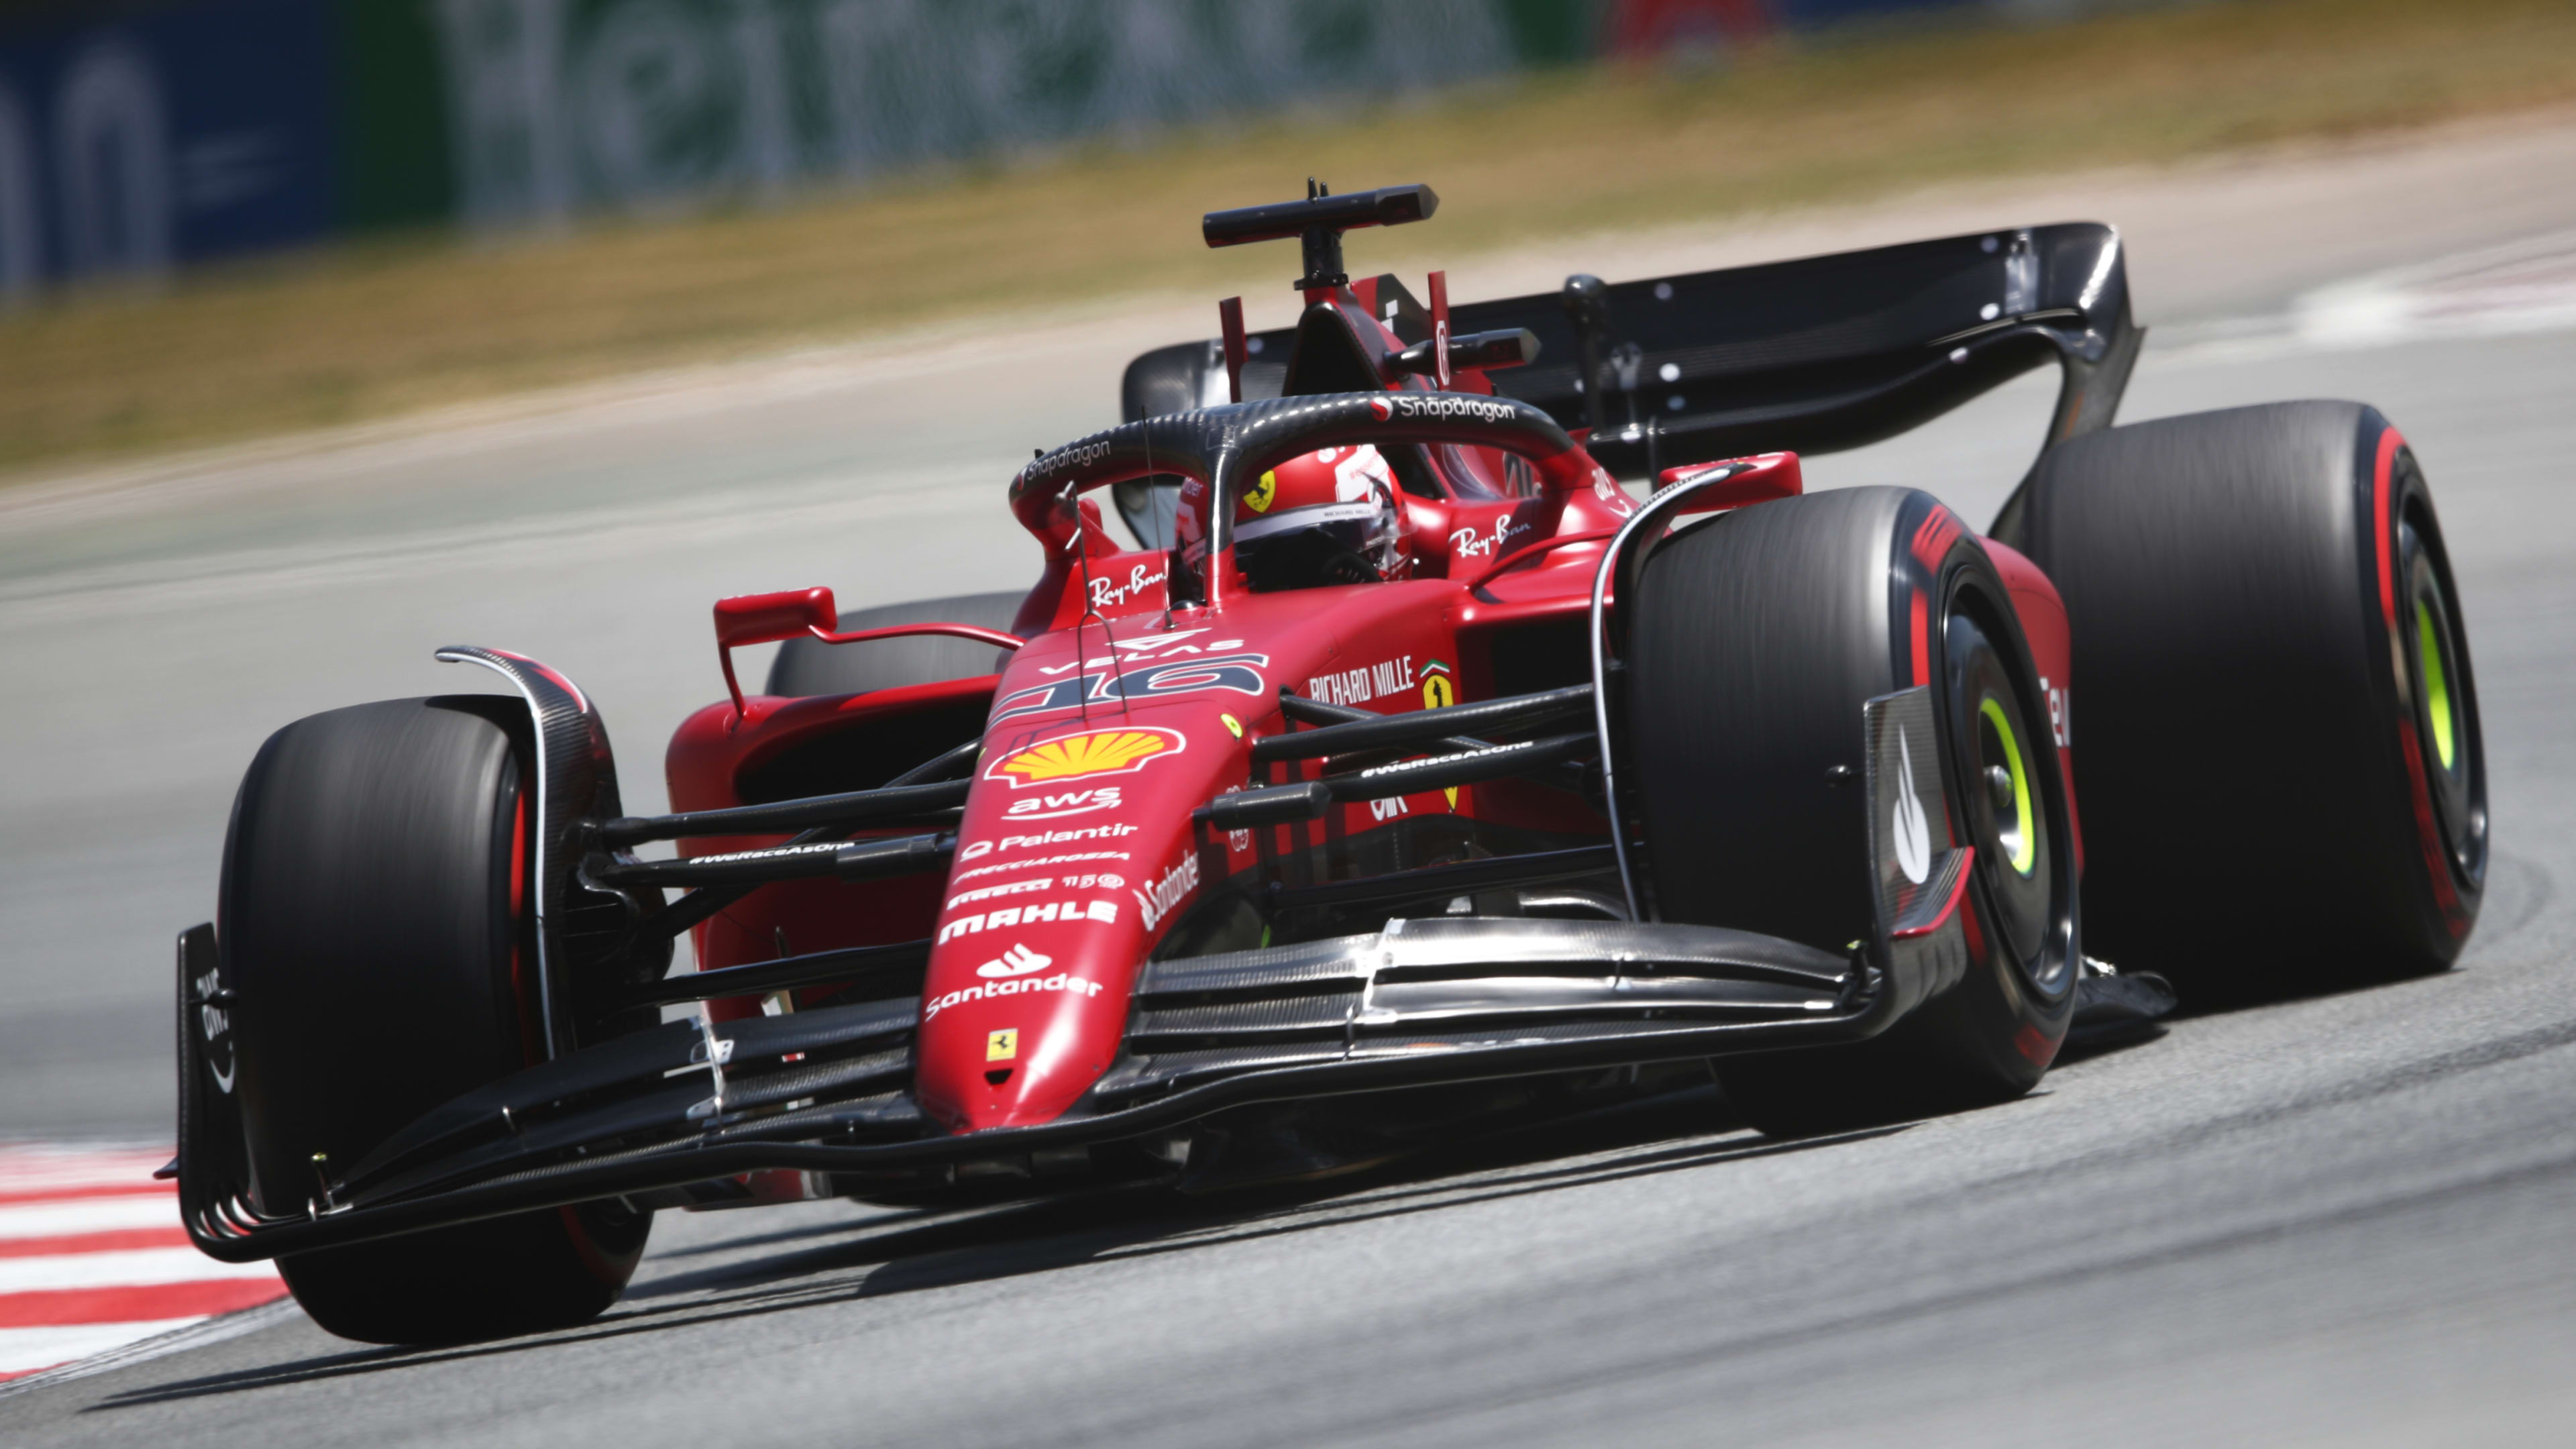 FP3: Leclerc leads Verstappen and Russell in final practice before Spanish GP qualifying - Formula 1